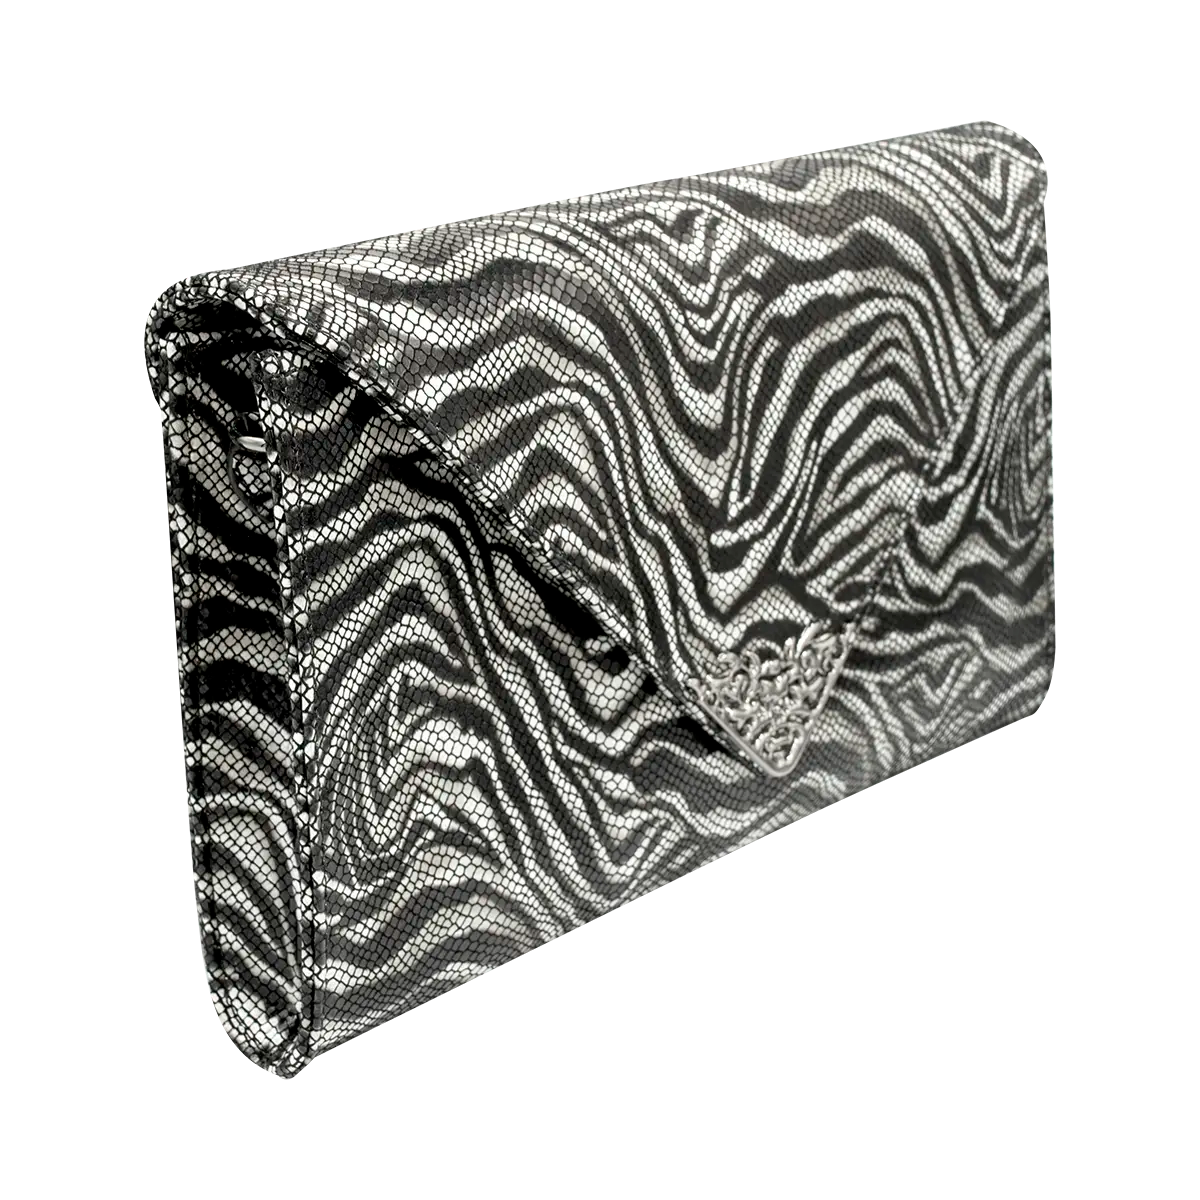 large black and white print leather clutch with strap. Fashion accessory for women in San Diego, CA.